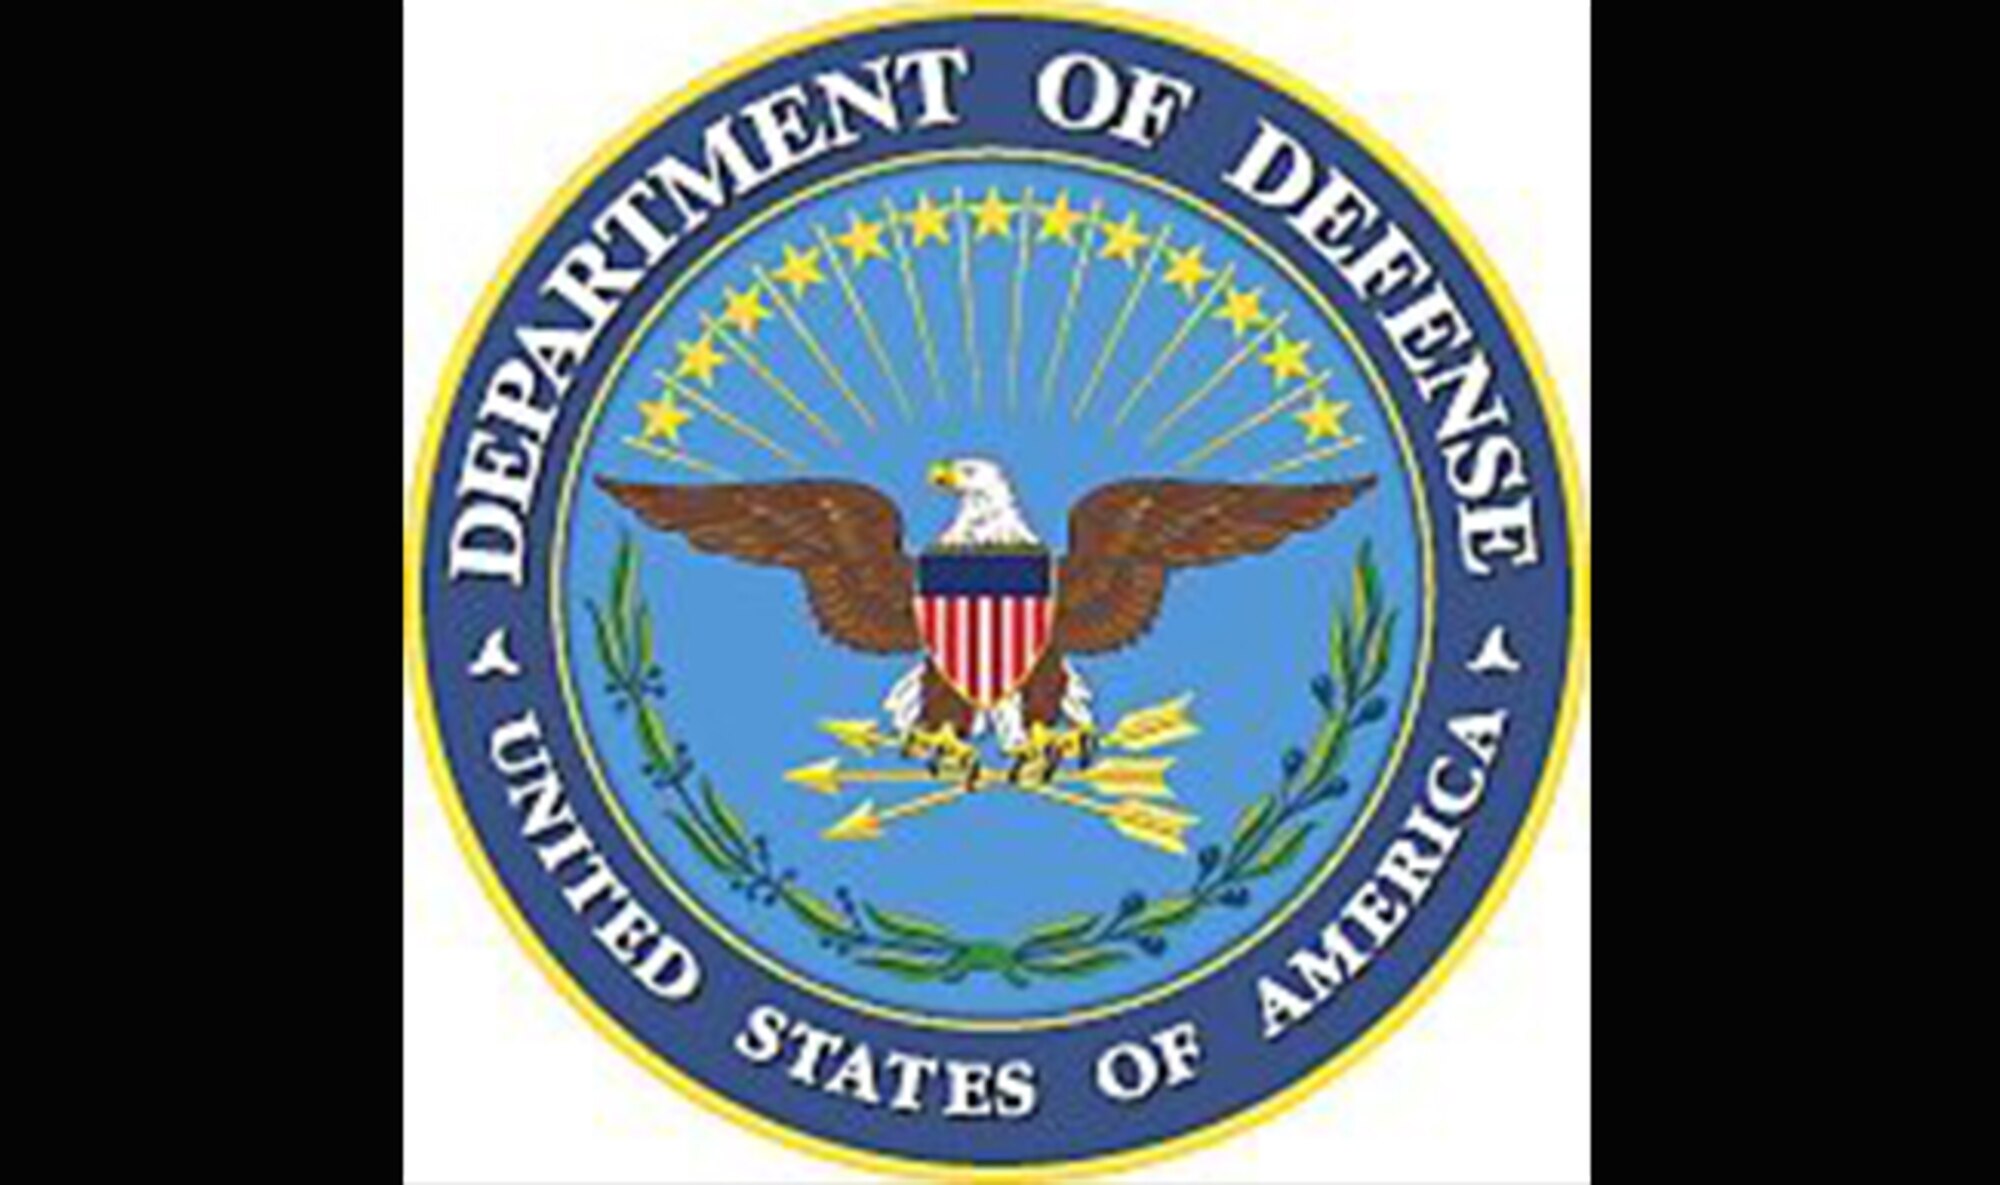 Department of Defense Seal with black background